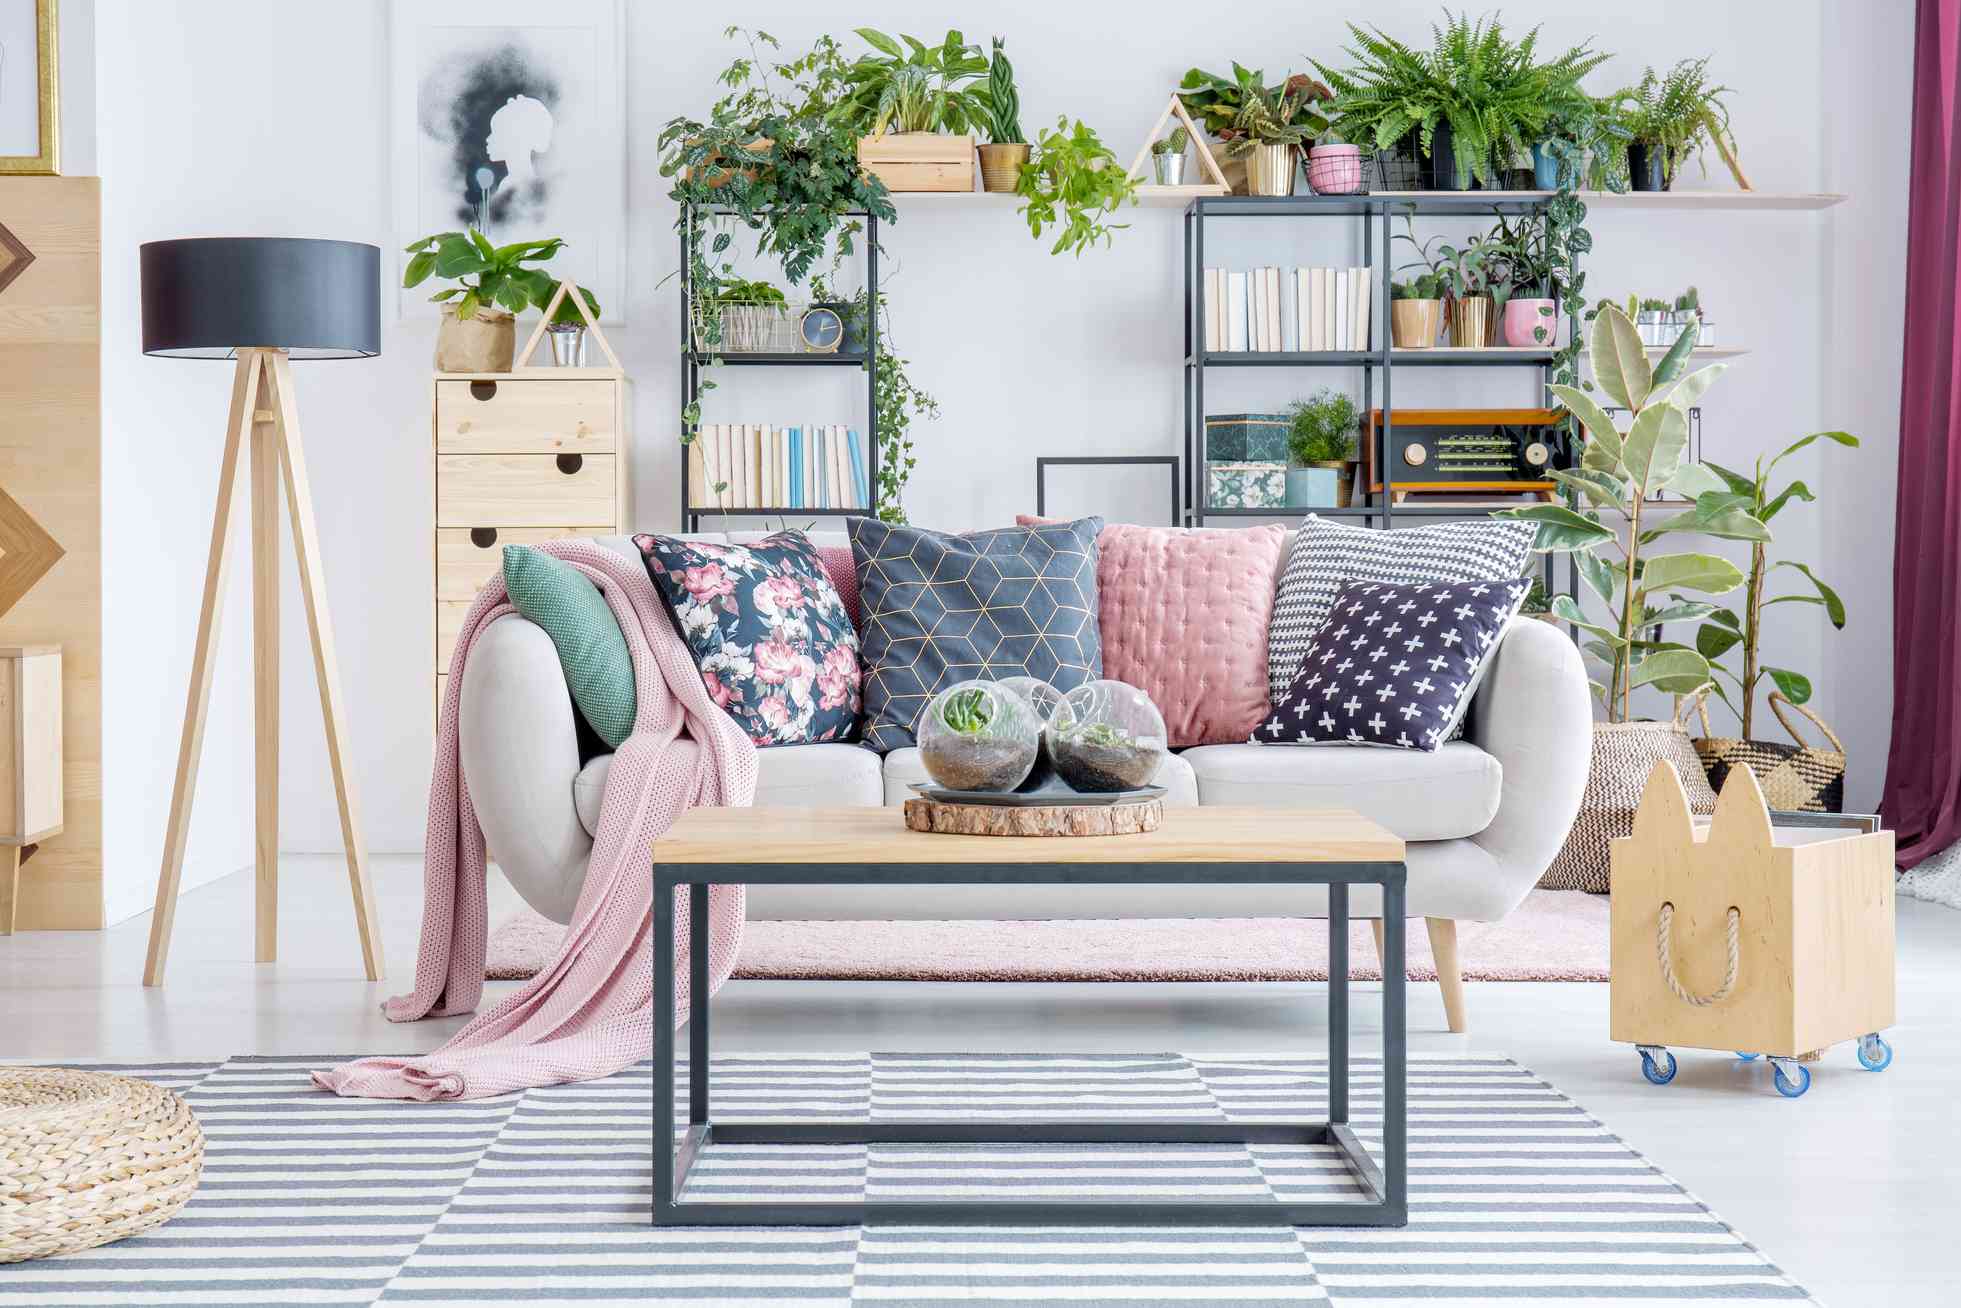 Decorating With Pattern: 11 Ways To Embrace Print At Home